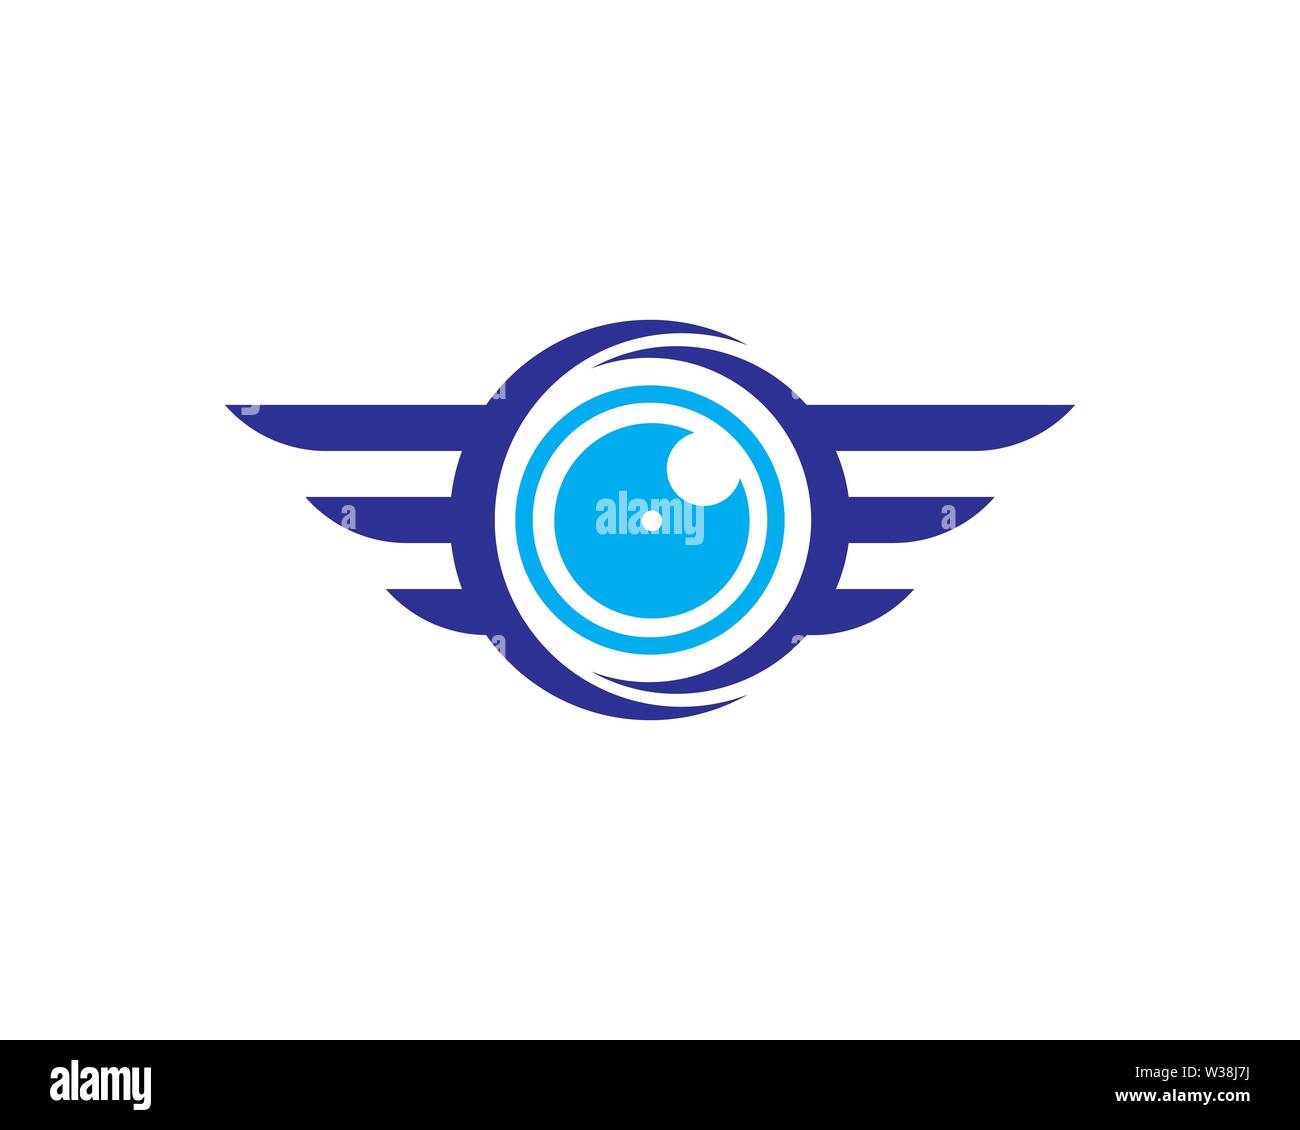 Vector drone logo set isolated on background for shop, drone service logo, flying club label, badge and design element Stock Photo